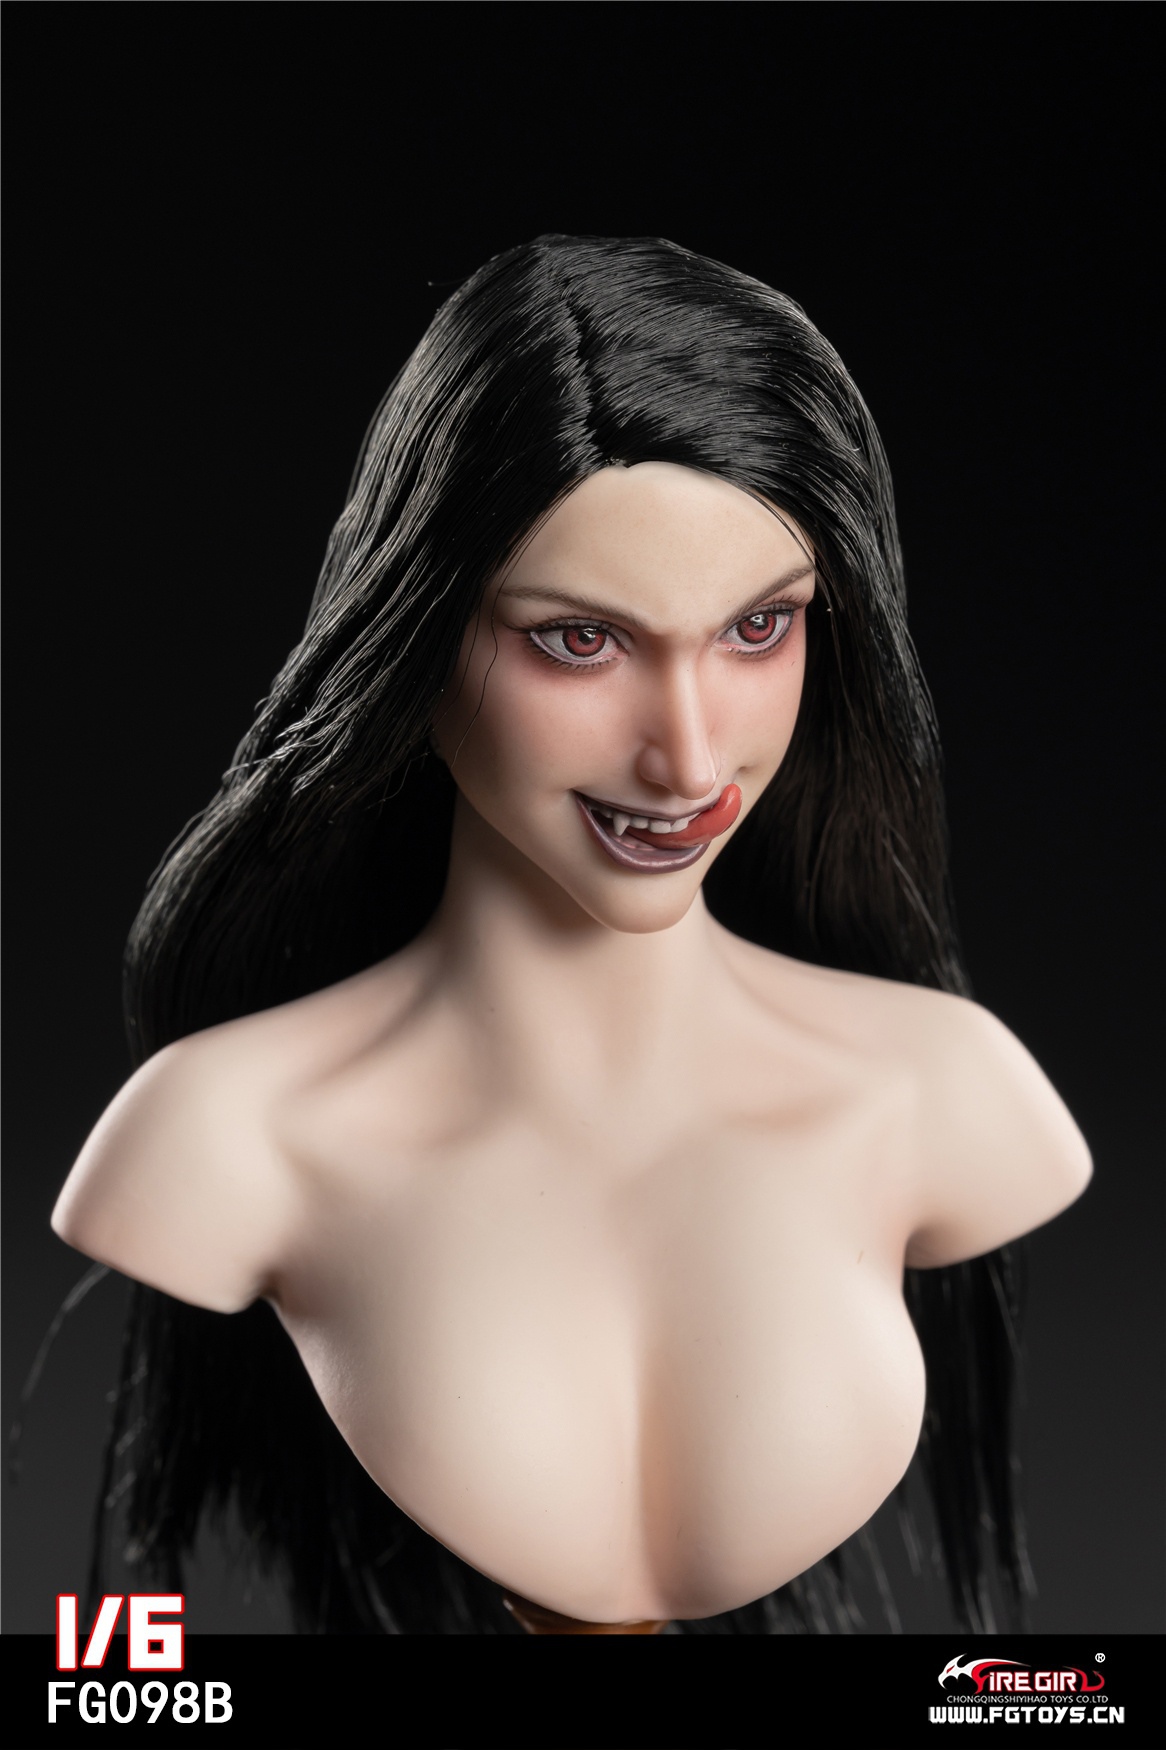 female - NEW PRODUCT: Fire Girl Toys: Witch Head Sculpture (FG098A/FG098B) 1172